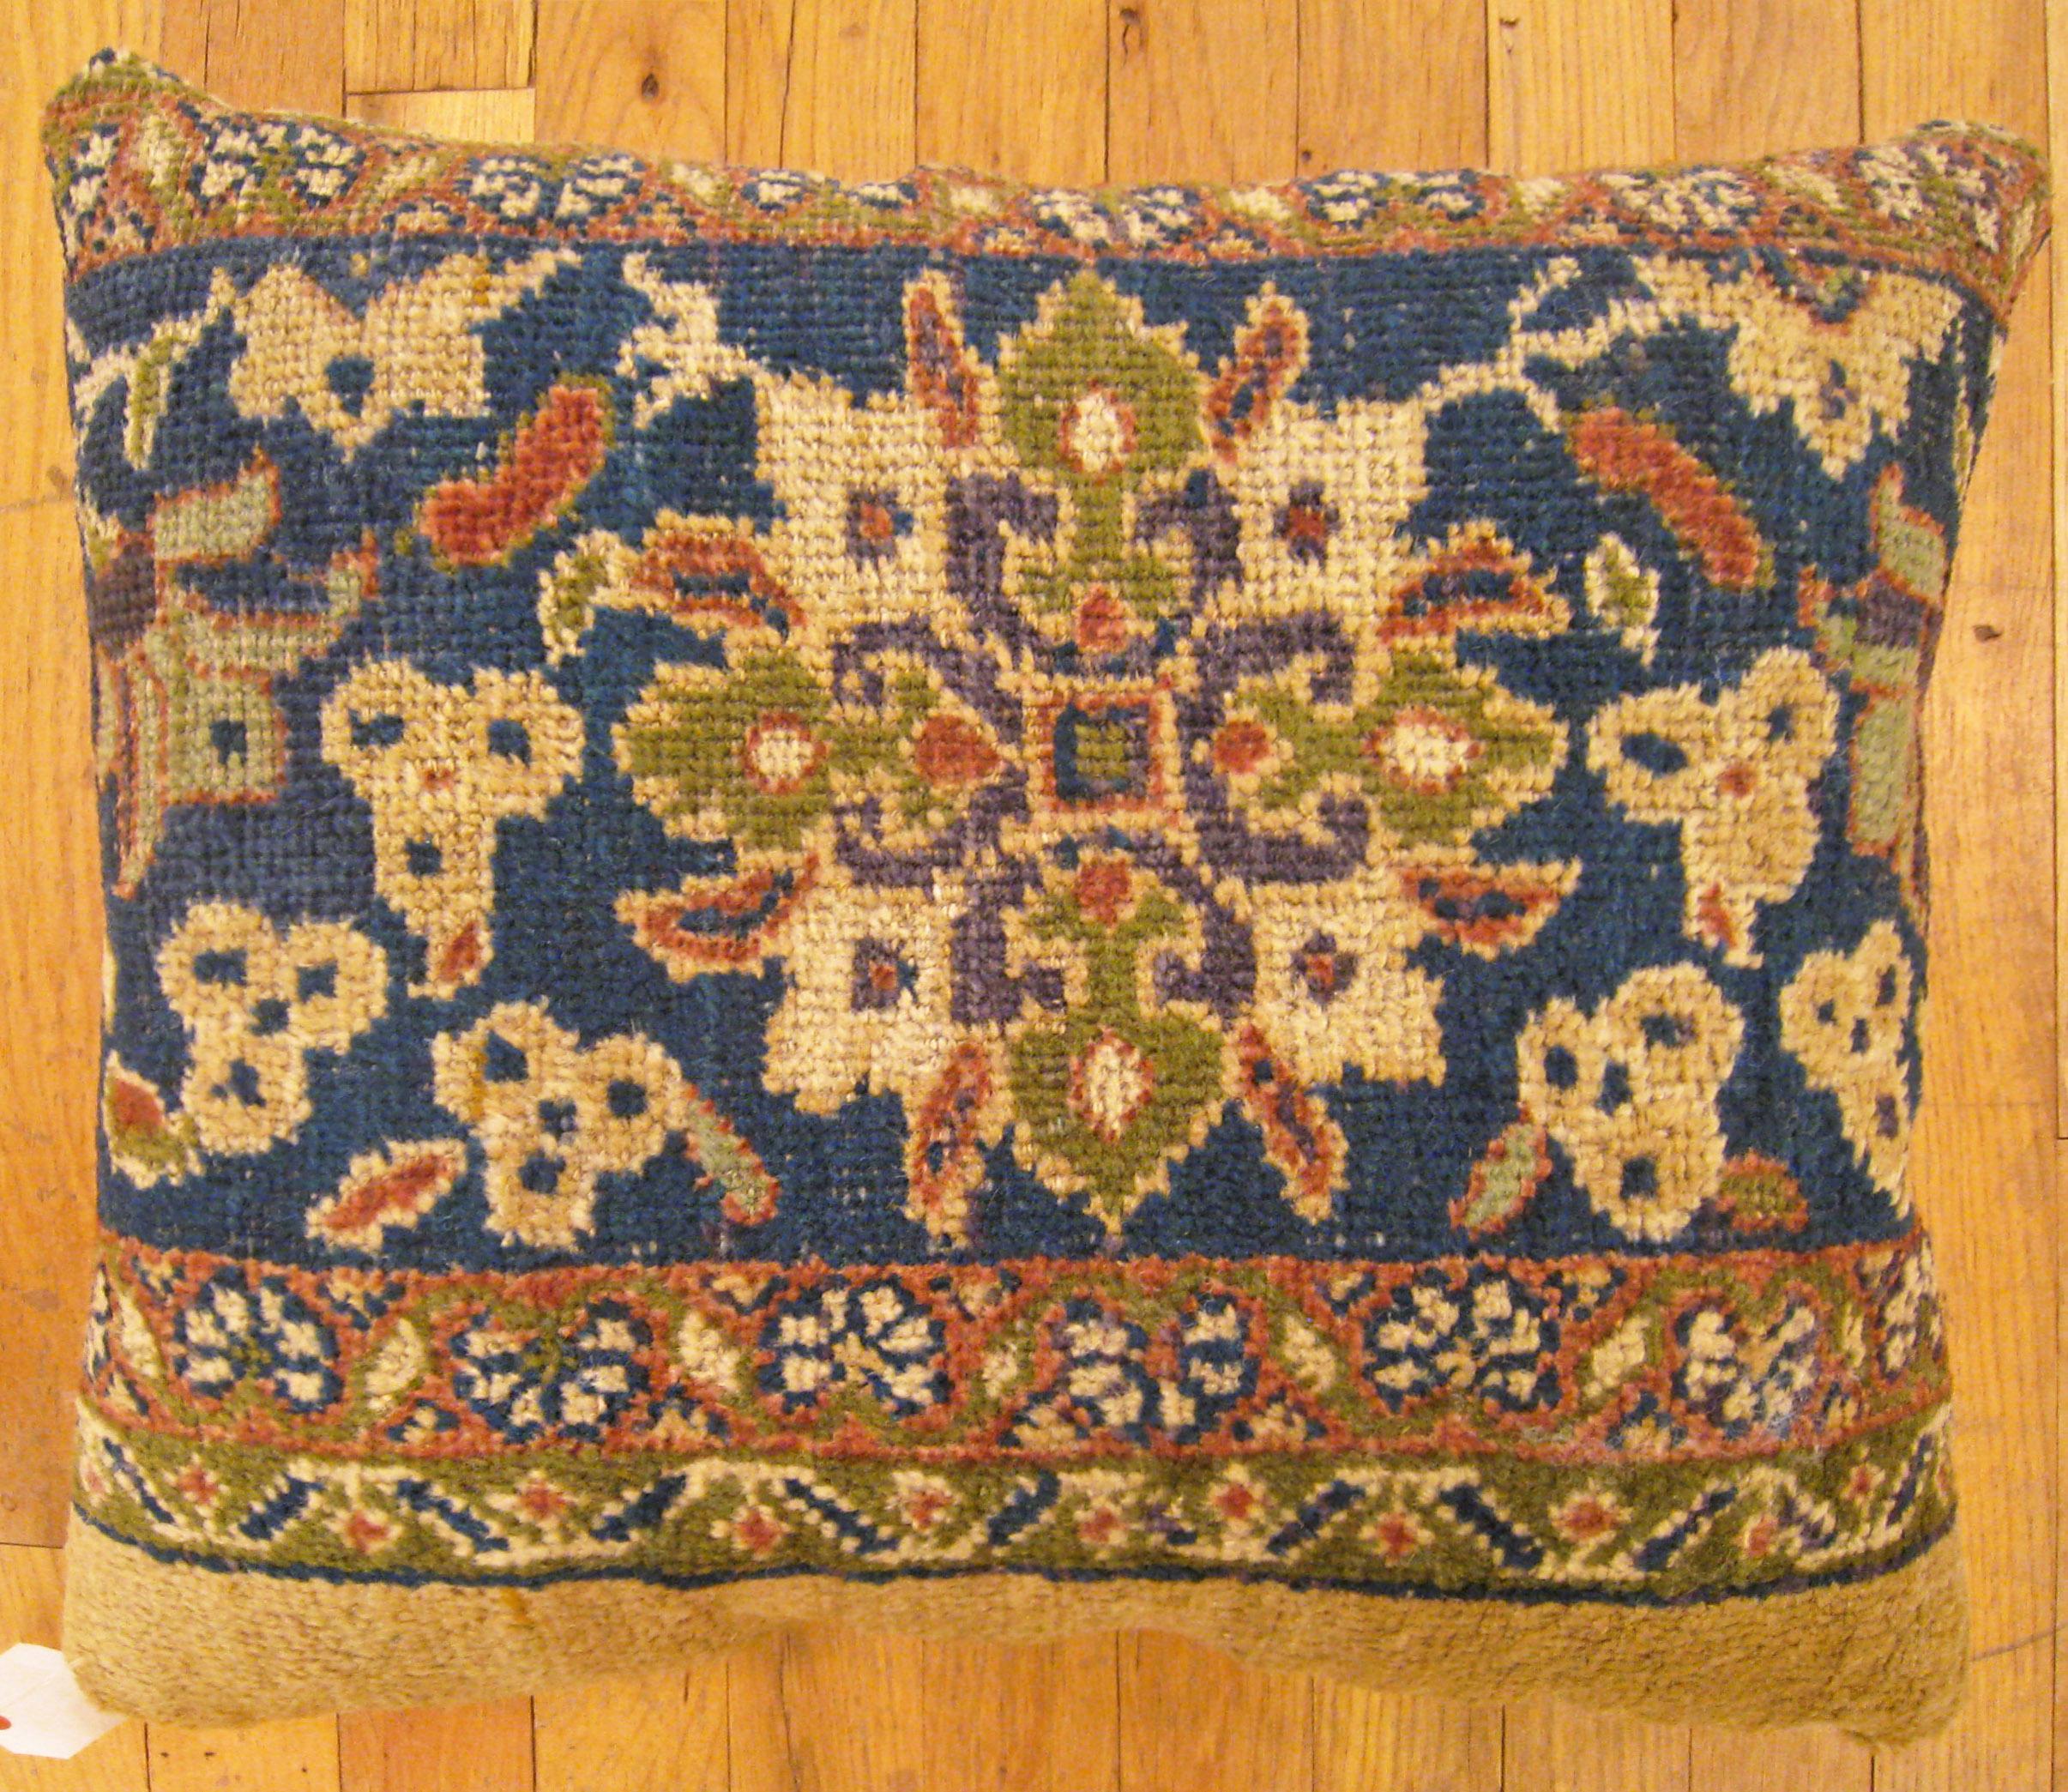 Antique Persian Sultanabad carpet pillow; size 1'10” x 1'6”.

An antique decorative pillow with floral elements allover a camel central field, size 1'10” x 1'6”. This lovely decorative pillow features an antique fabric of a Sultanabad carpet on